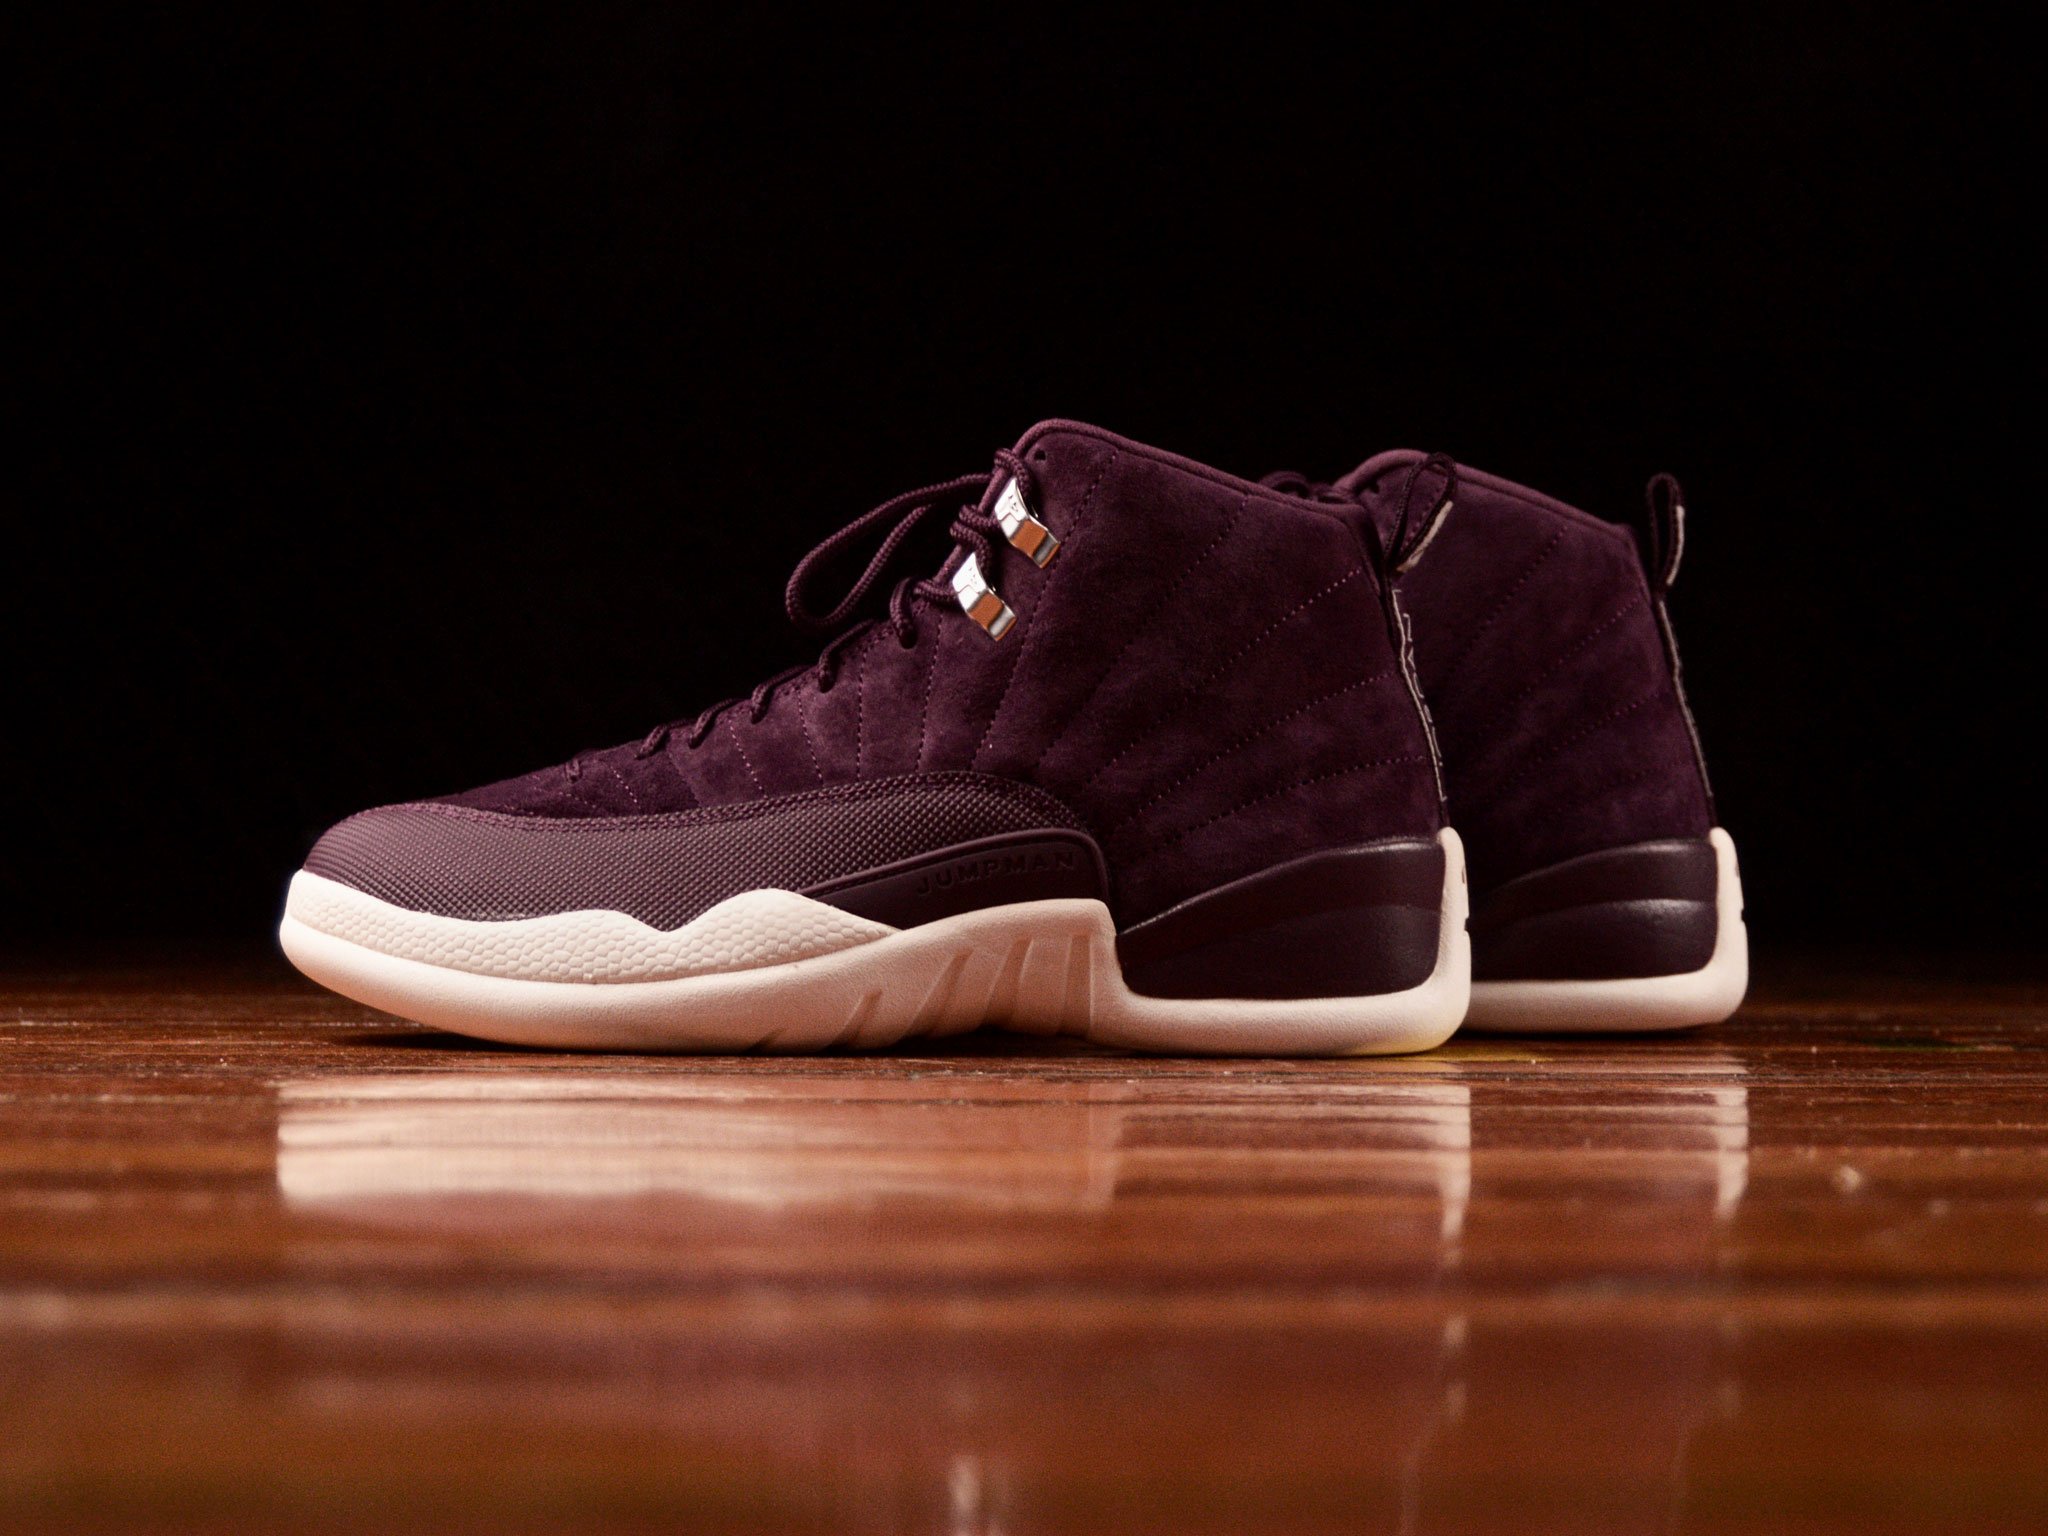 We're Two Days Away From The Release Of The Air Jordan 12 Bordeaux • KicksOnFire.com